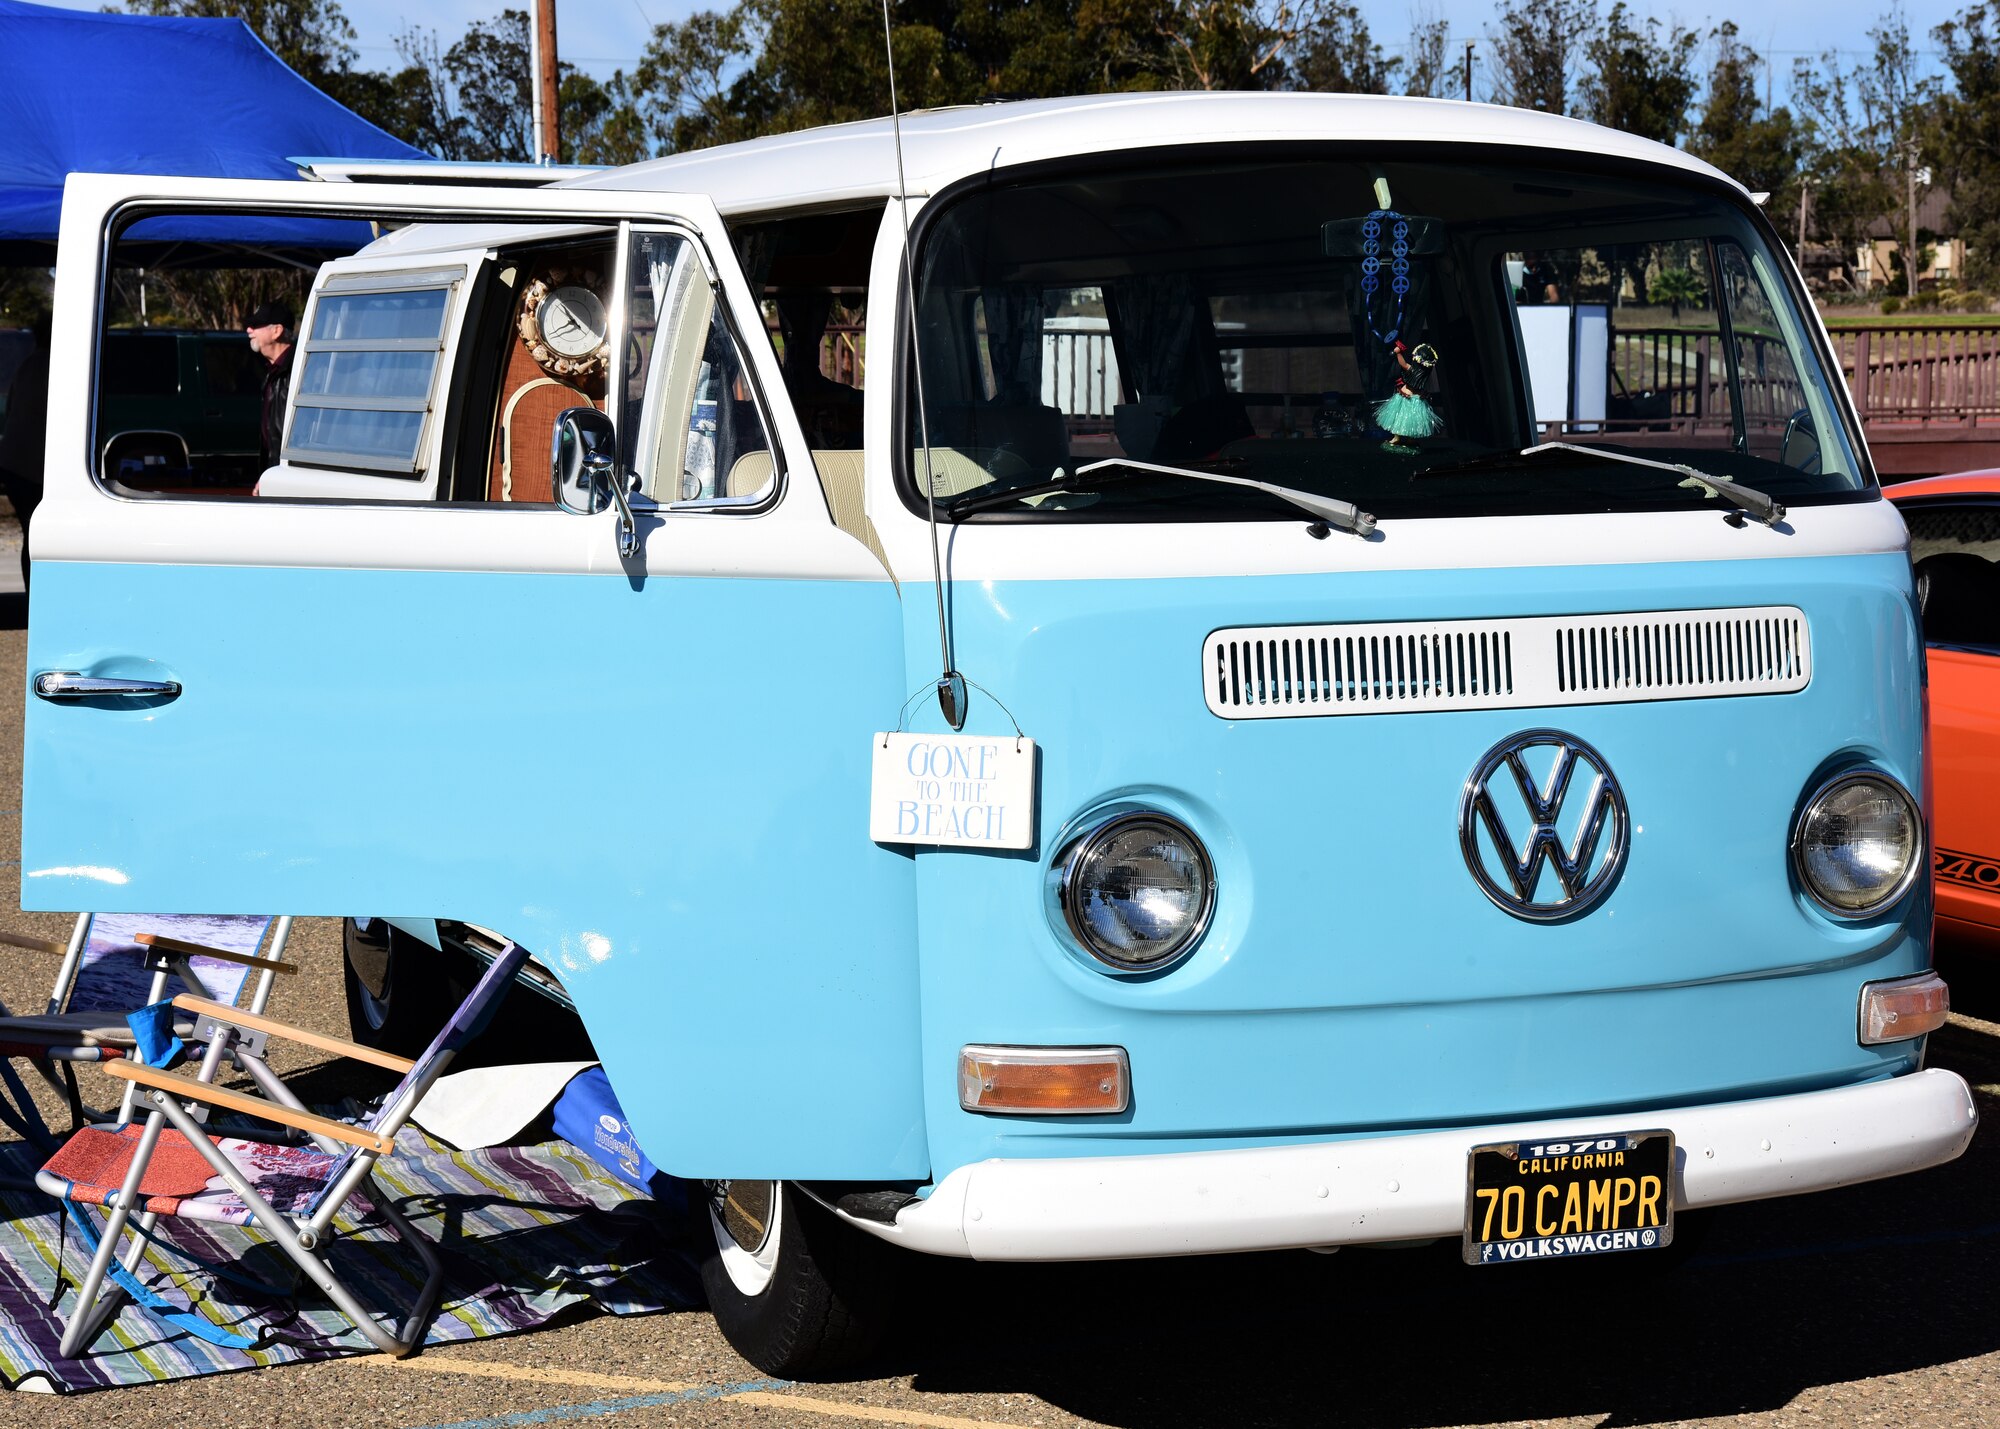 A 1970 Volkswagen Westfalia Bus is displayed during Vandenberg’s Ninth Annual Exotic Car Show Oct. 23, 2021, at Vandenberg Space Force Base, Calif. The 30th Force Support Squadron provides base support promoting public and private partnerships. (U.S. Space Force photo by Airman First Class Tiarra Sibley)